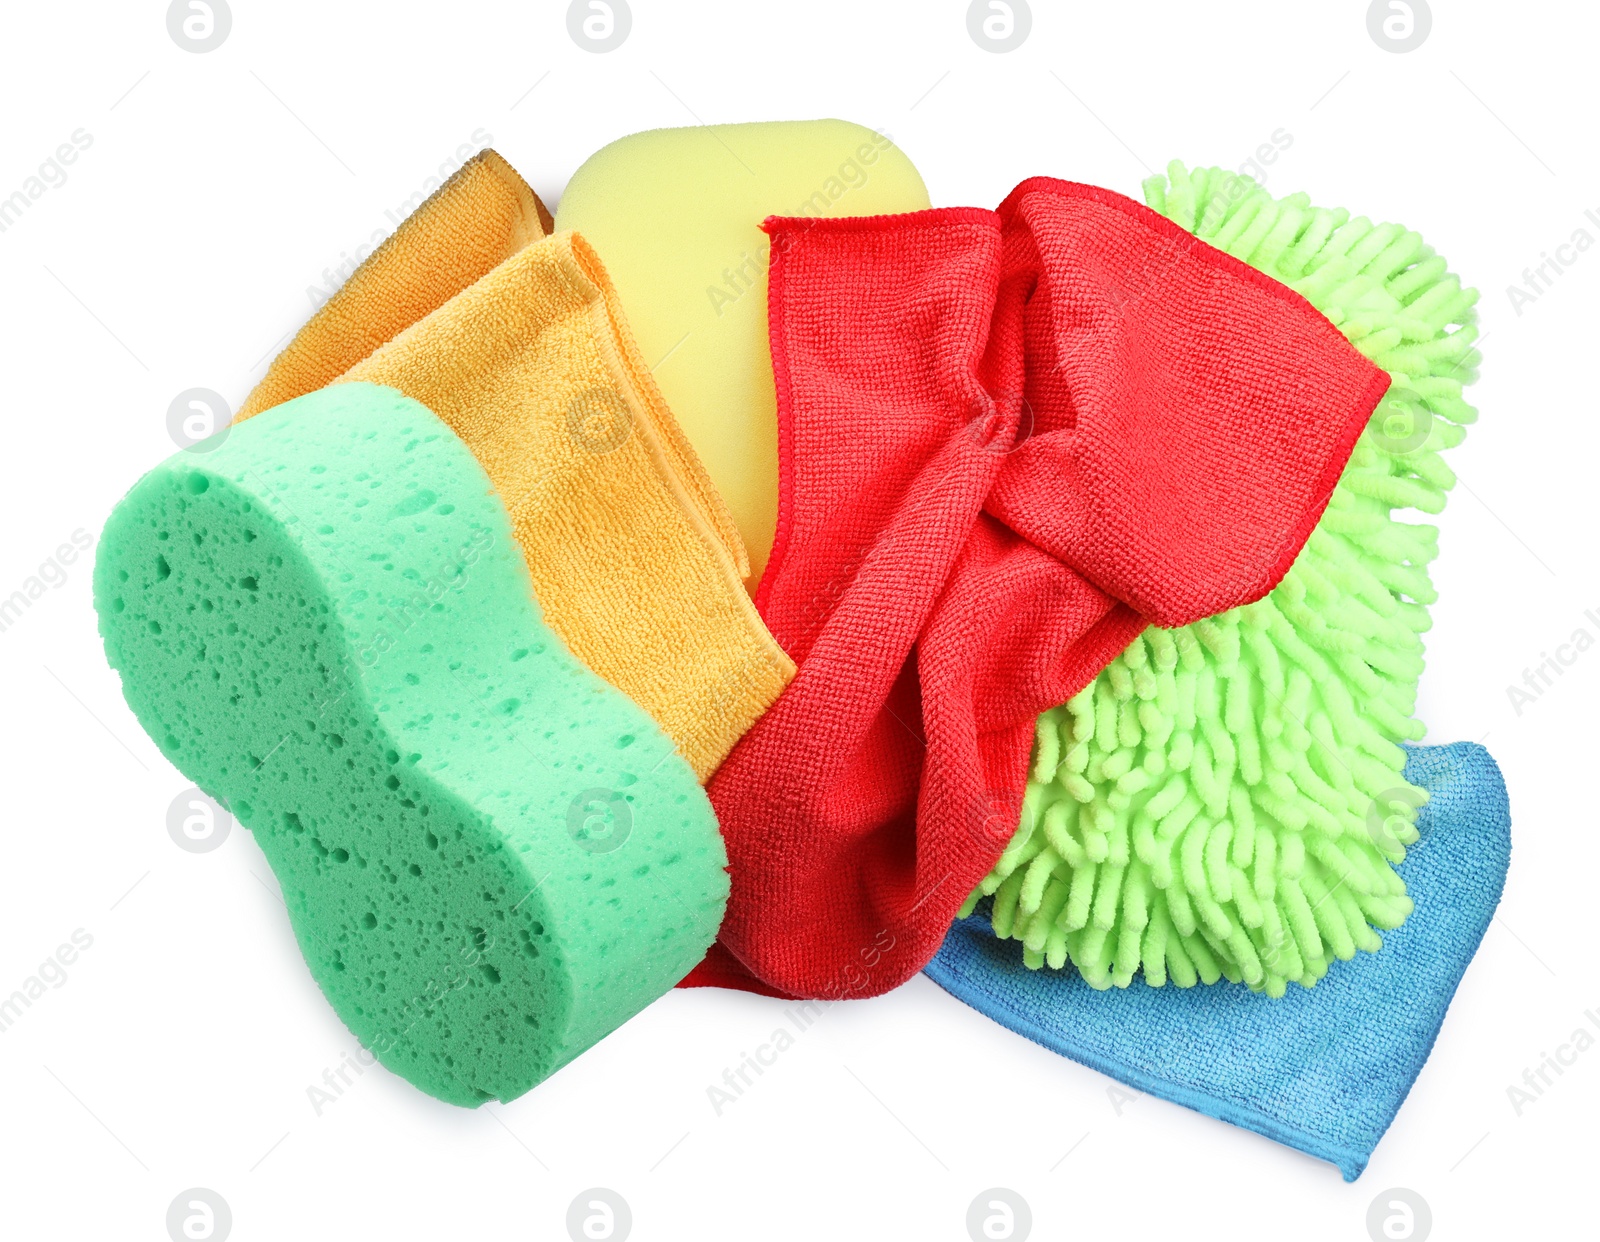 Photo of Sponges, cloths and car wash mitt on white background, top view